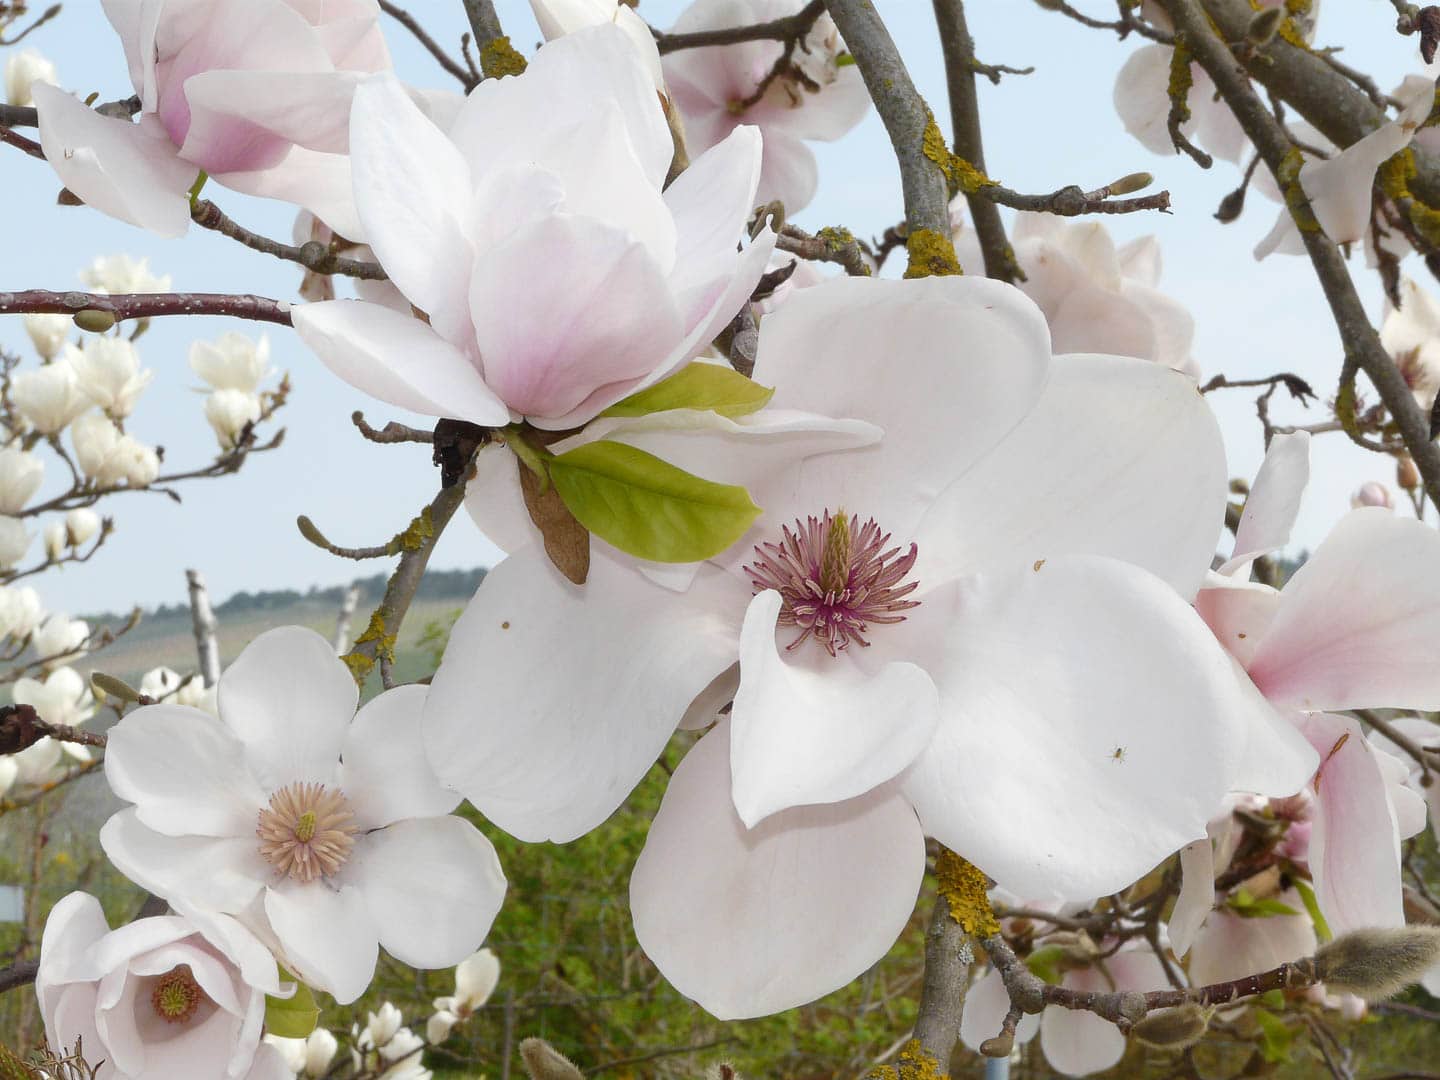 saucer magnolia with white flowers